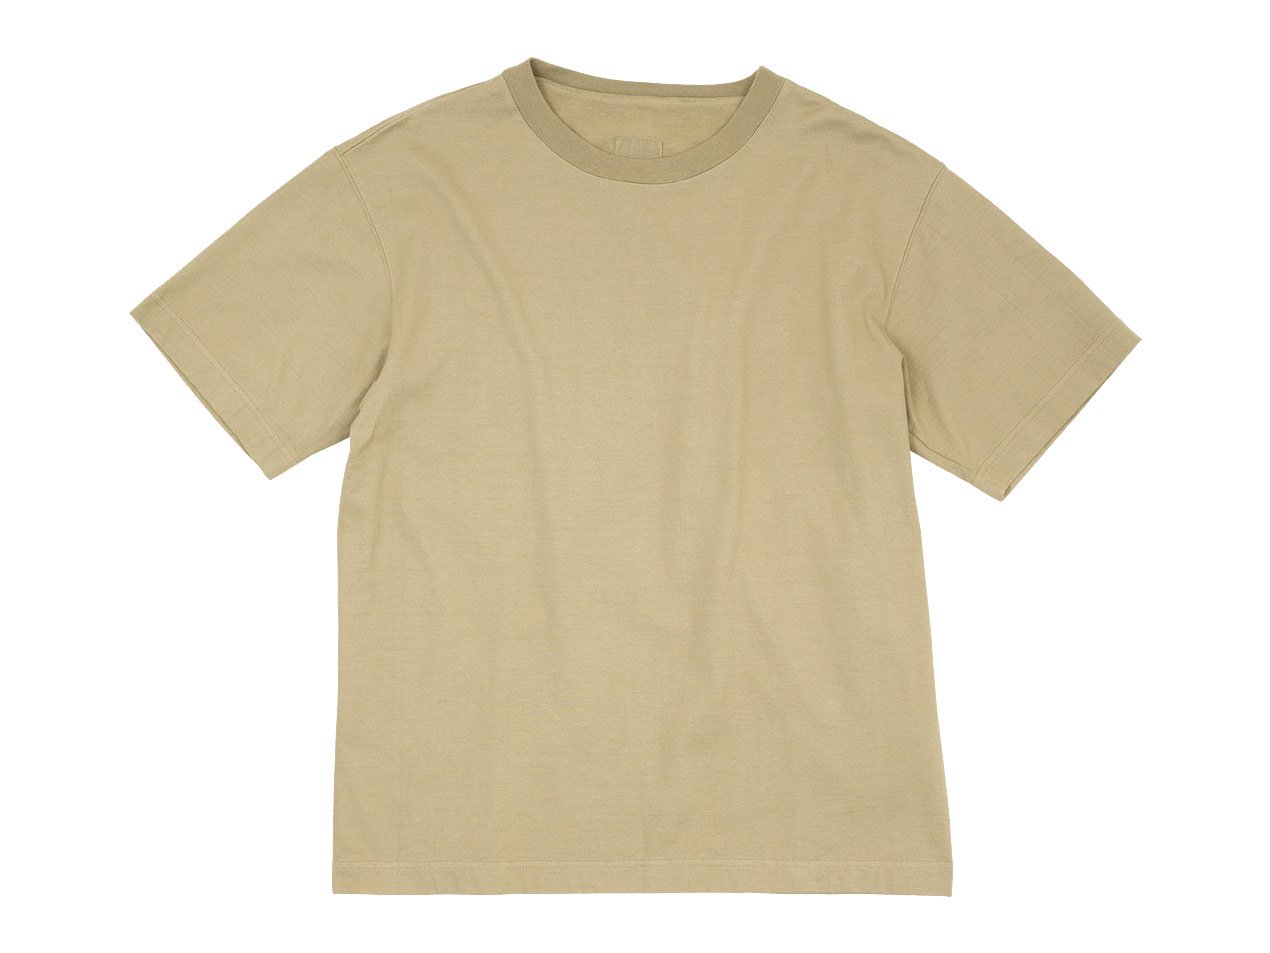 TOUJOURS Big T-shirt 38Dyed Camel LM33XC10